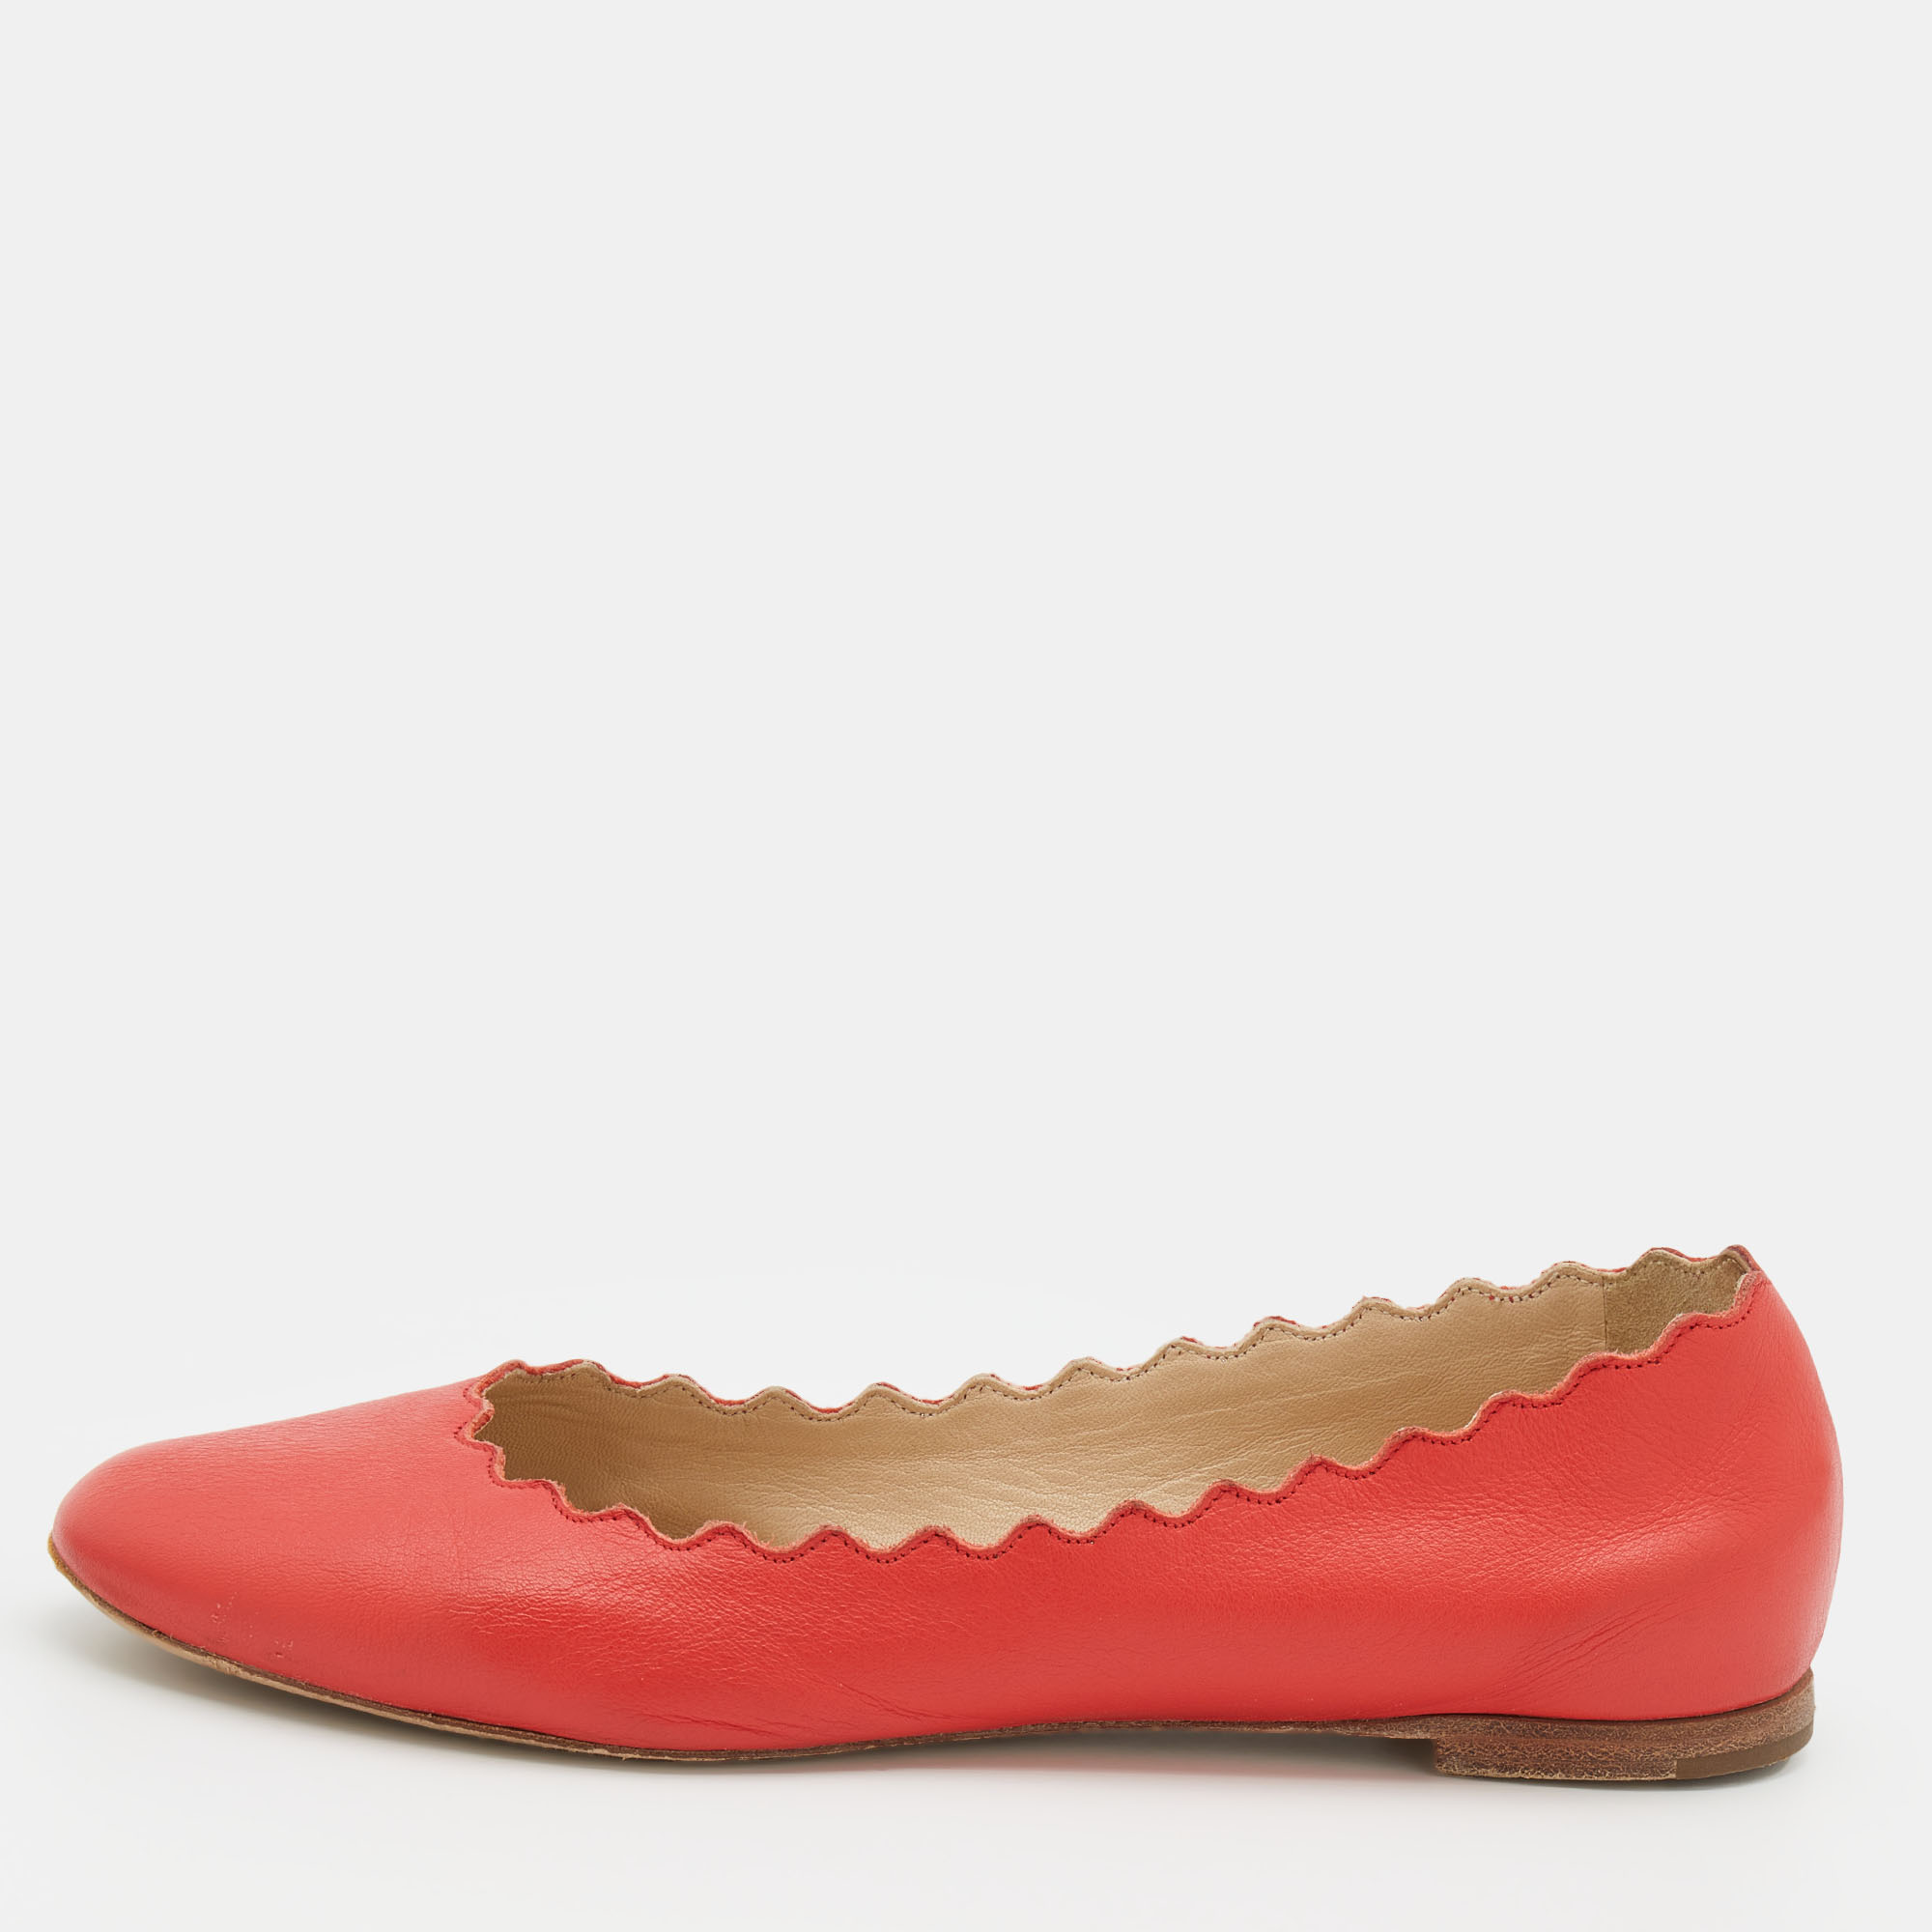 

Chloe Coral Red Leather Lauren Scalloped Ballet Flats Size